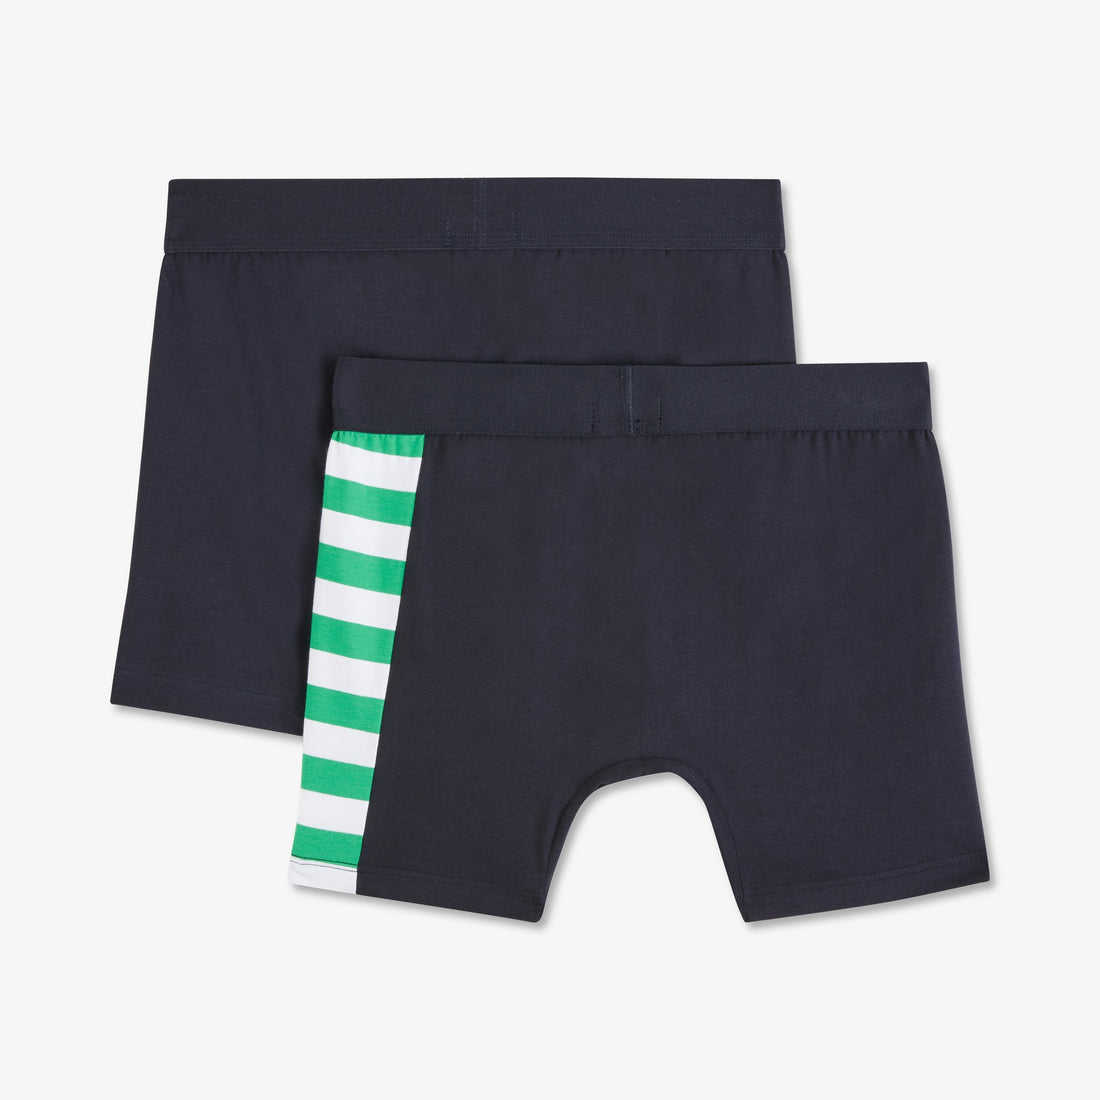 Pack Of 2 Green Boxers (Plain And Striped) - 02